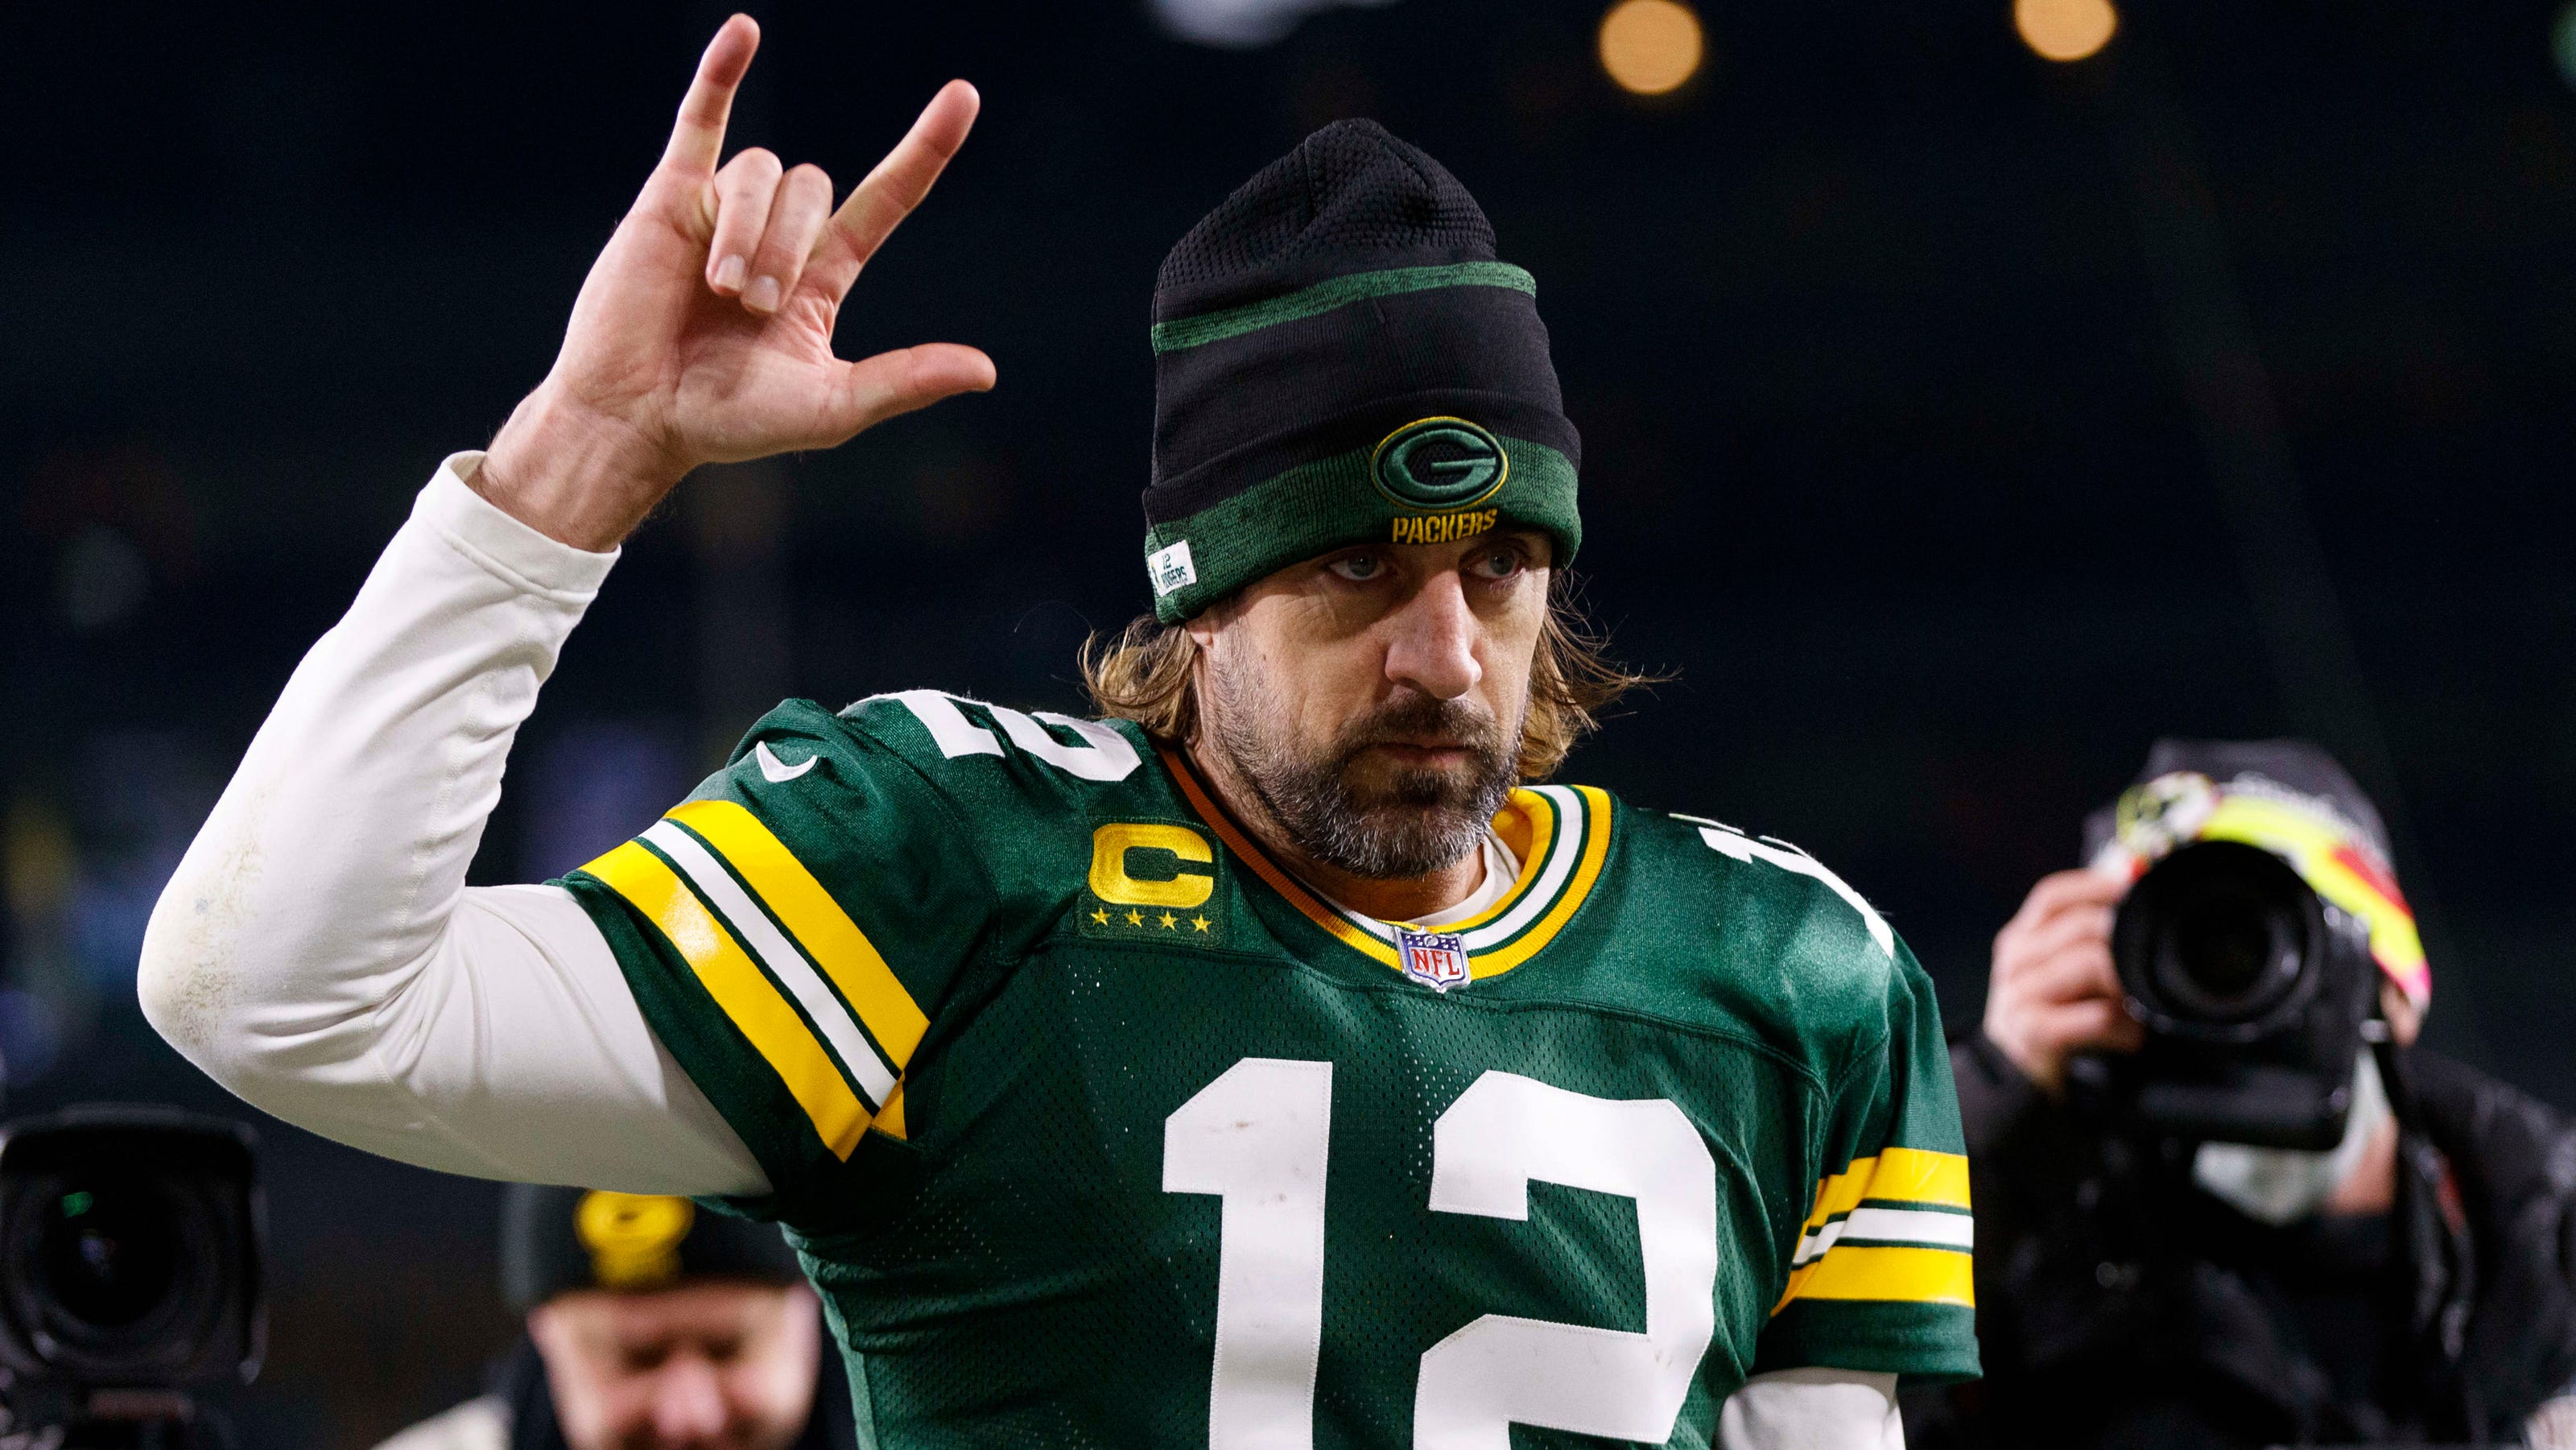 aaron-rodgers-says-taking-ayahuasca-helped-improve-mental-health-and-spurred-mvp-seasons